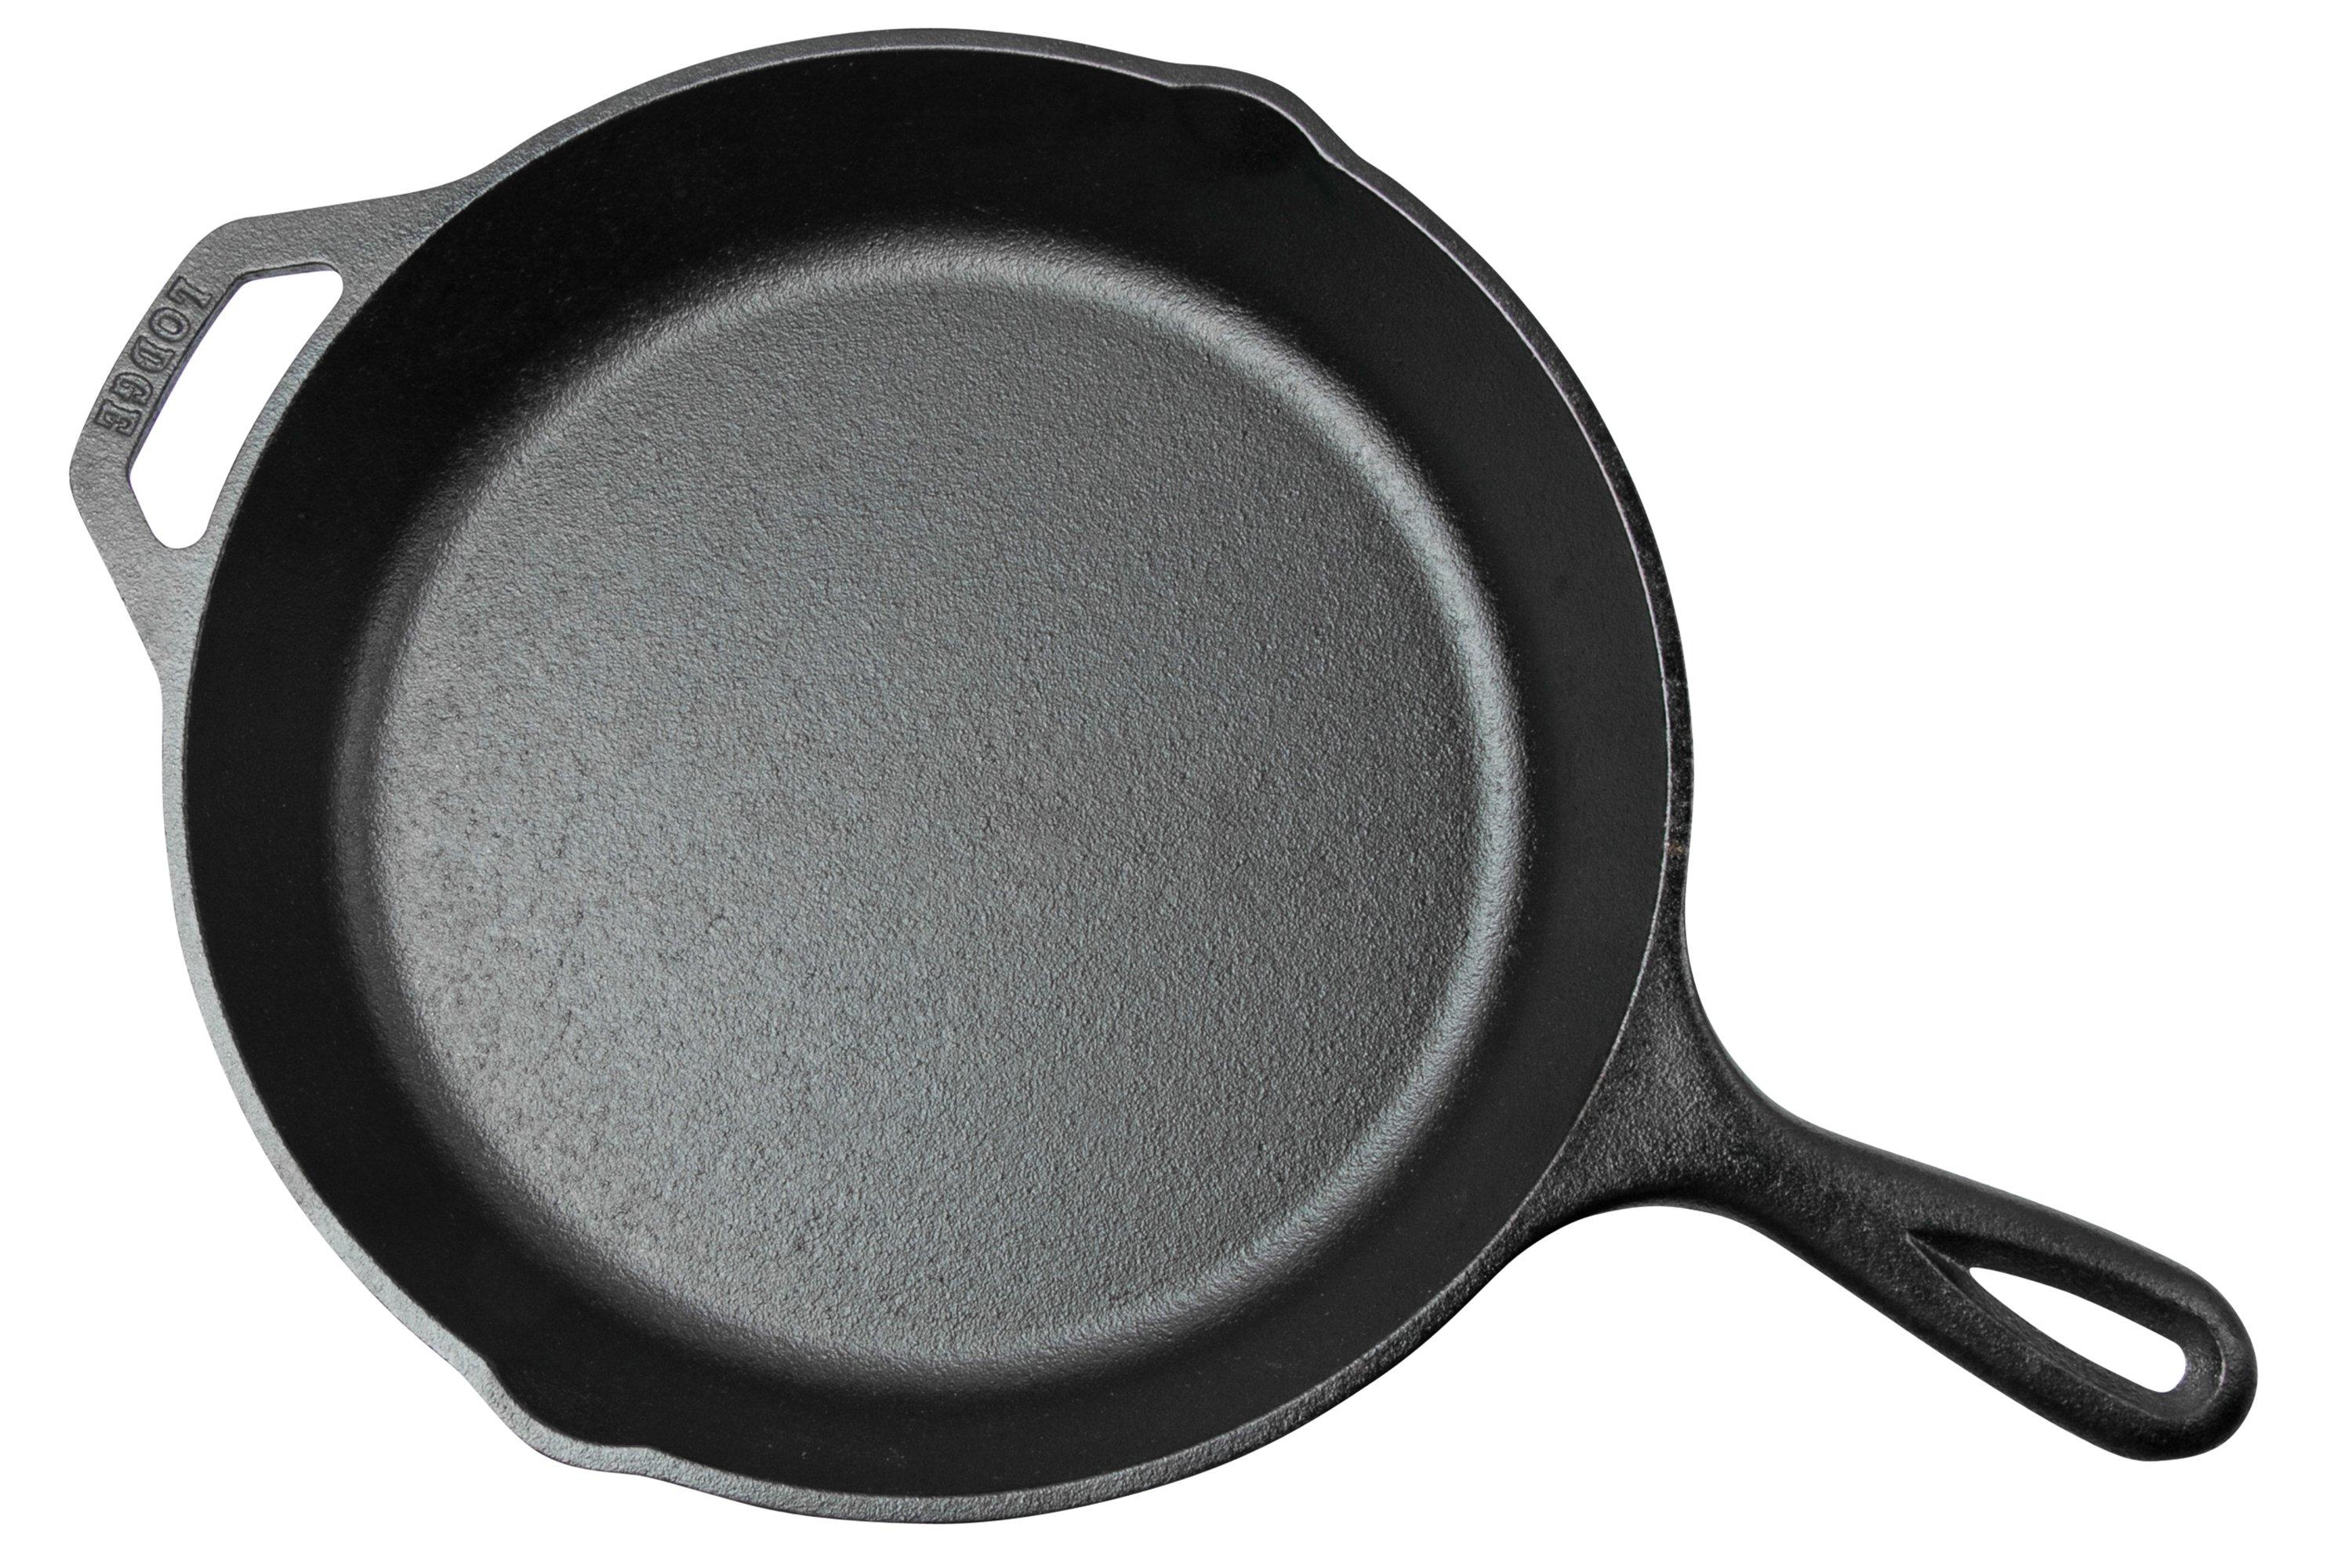 Lodge 12 in. Cast Iron Skillet in Black with Pour Spout L10SK3